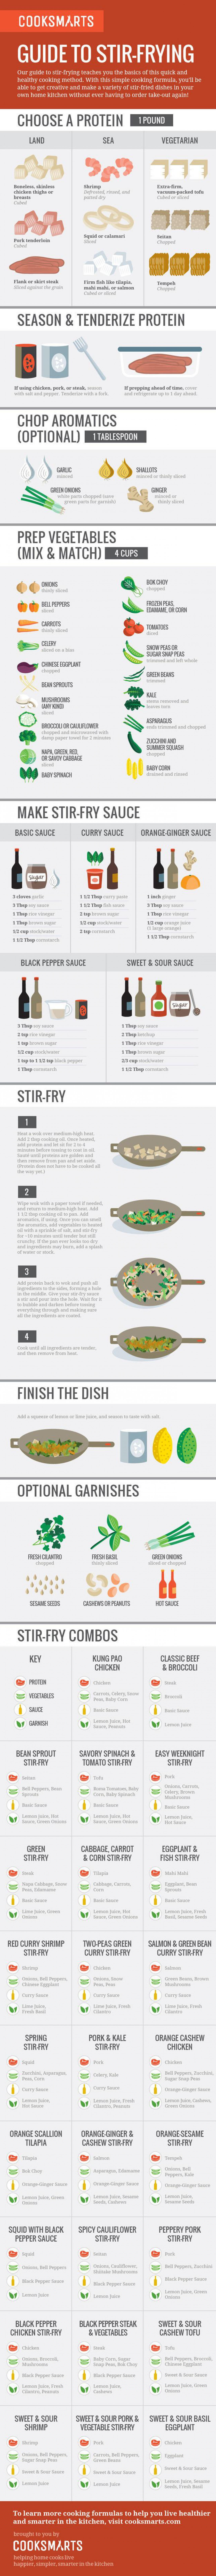 Cooksmart’s Guide to Stir-Frying